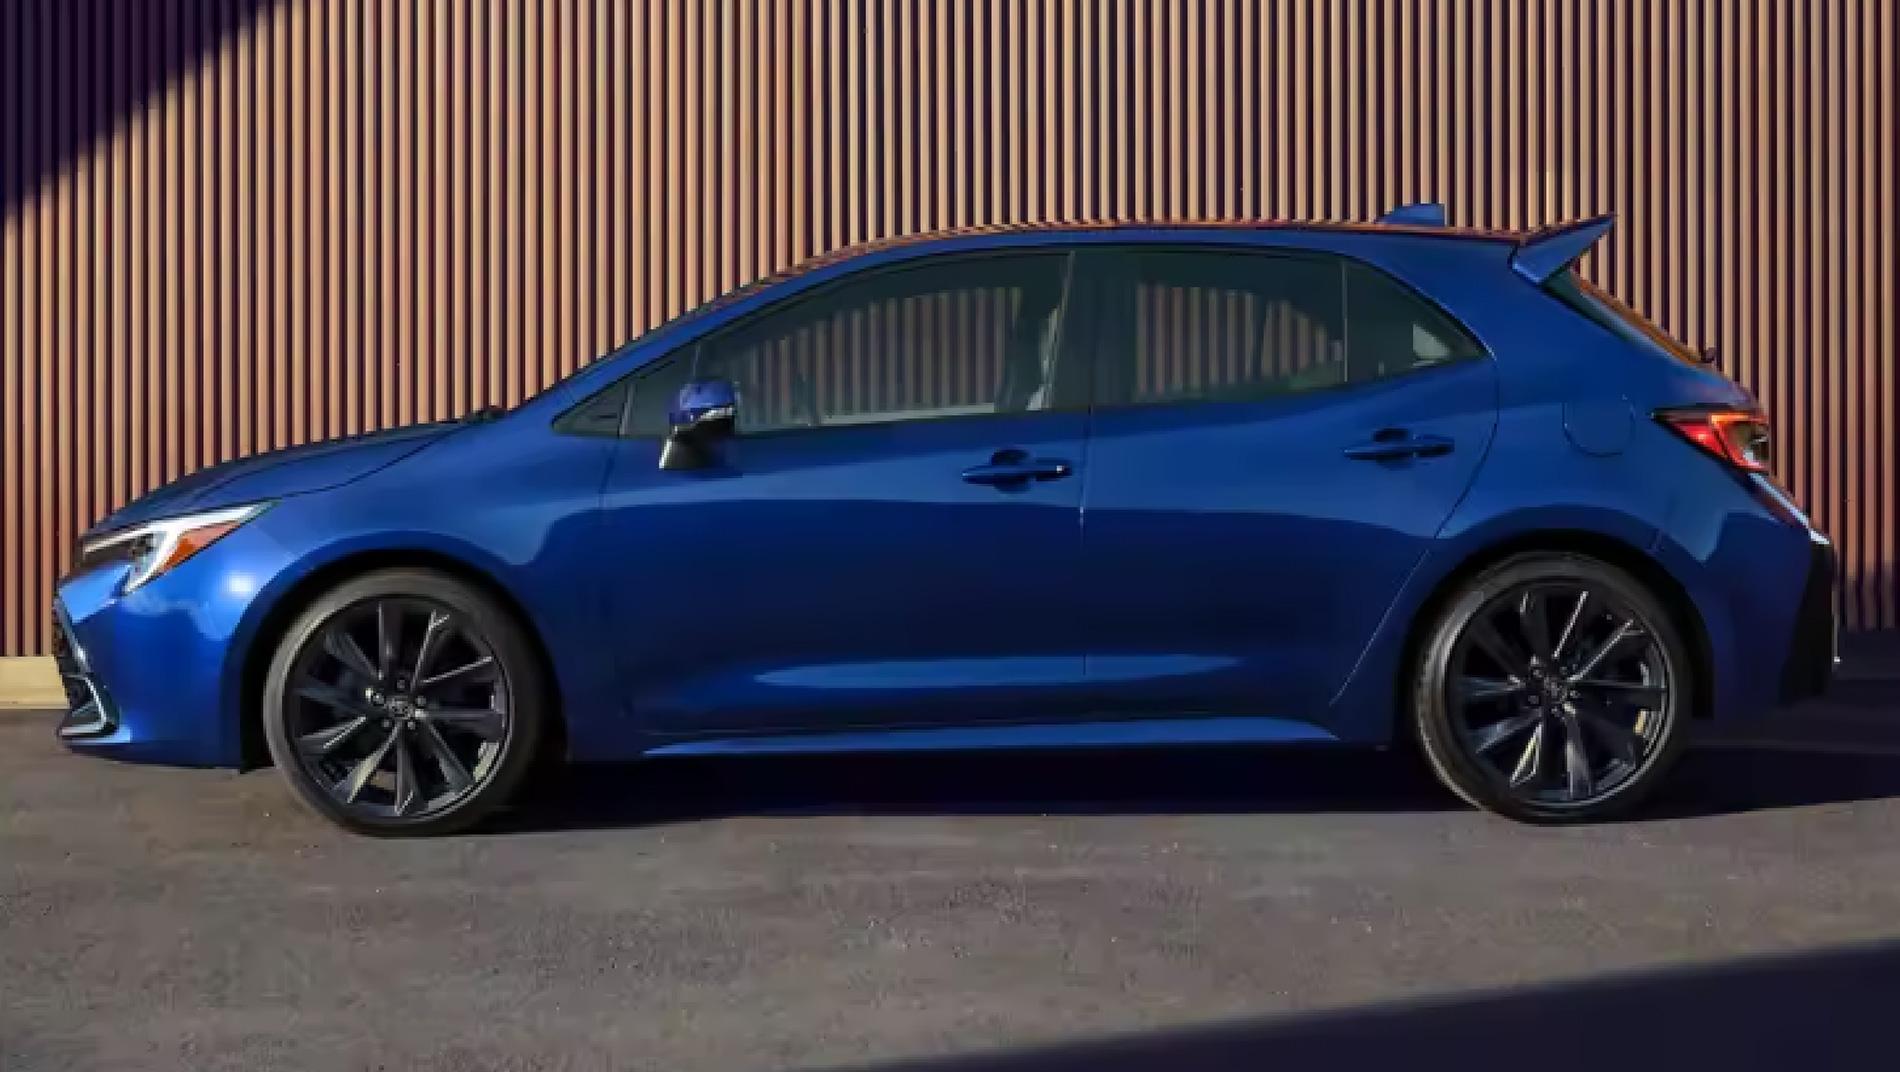 side angle of the outside of a blue Toyota Corolla Hatchback